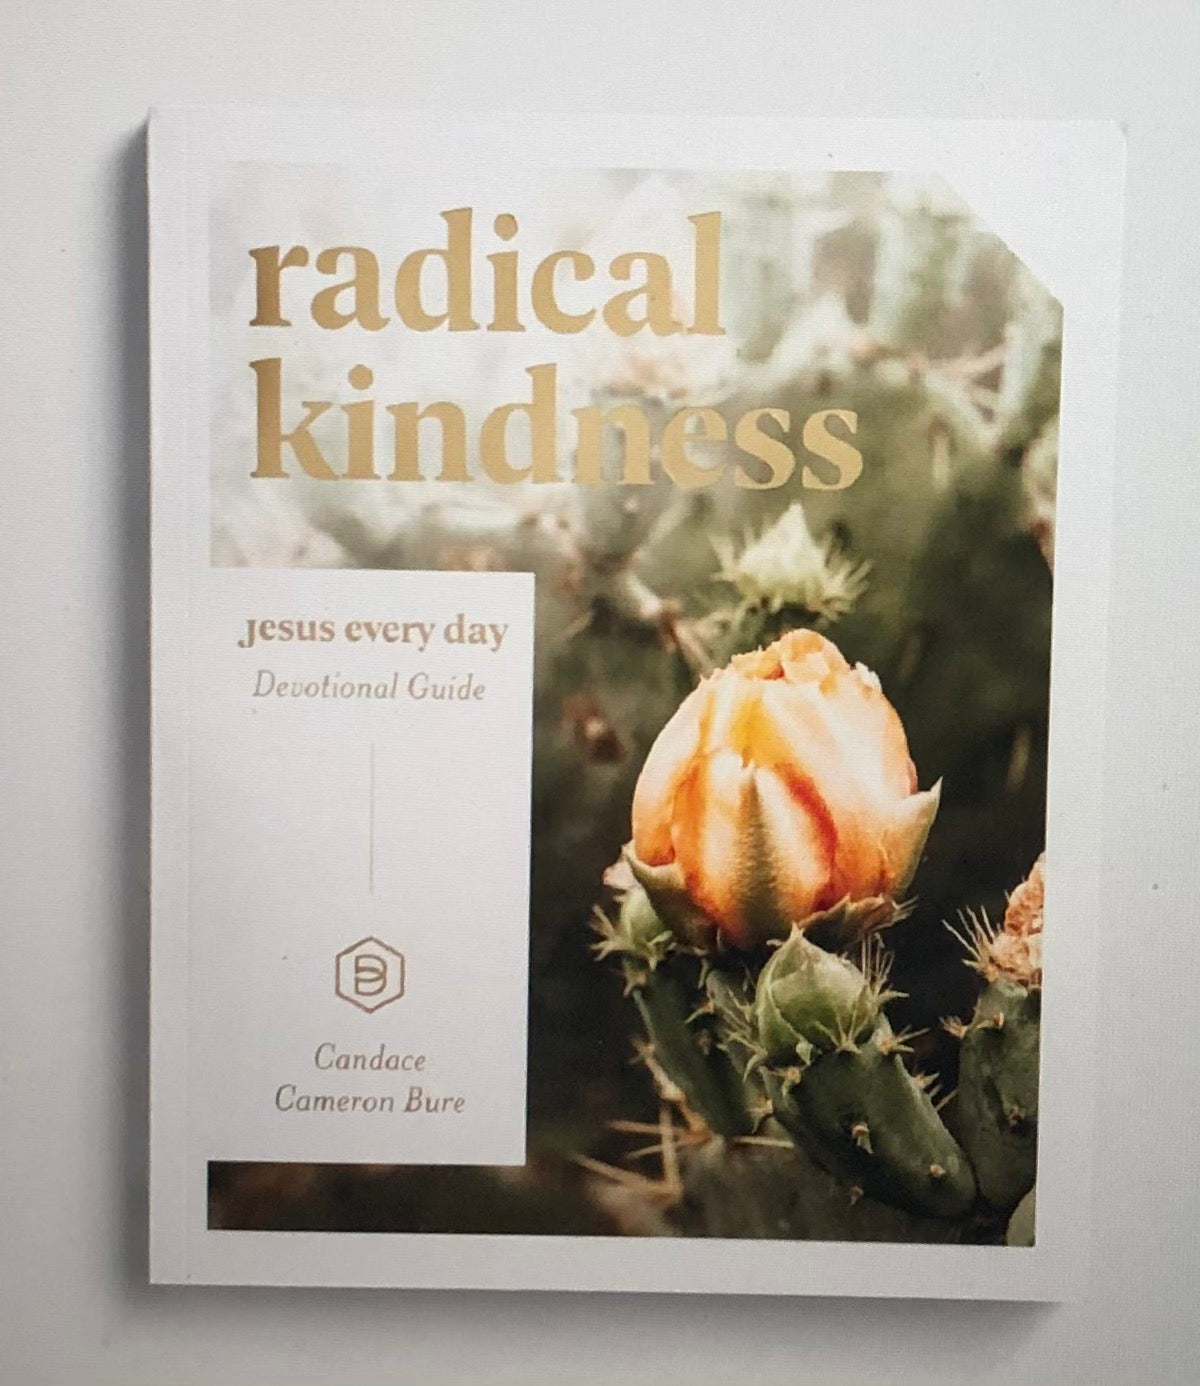 Candace Cameron Bure - Jesus Every Day: Radical Kindness - Devotional Guide